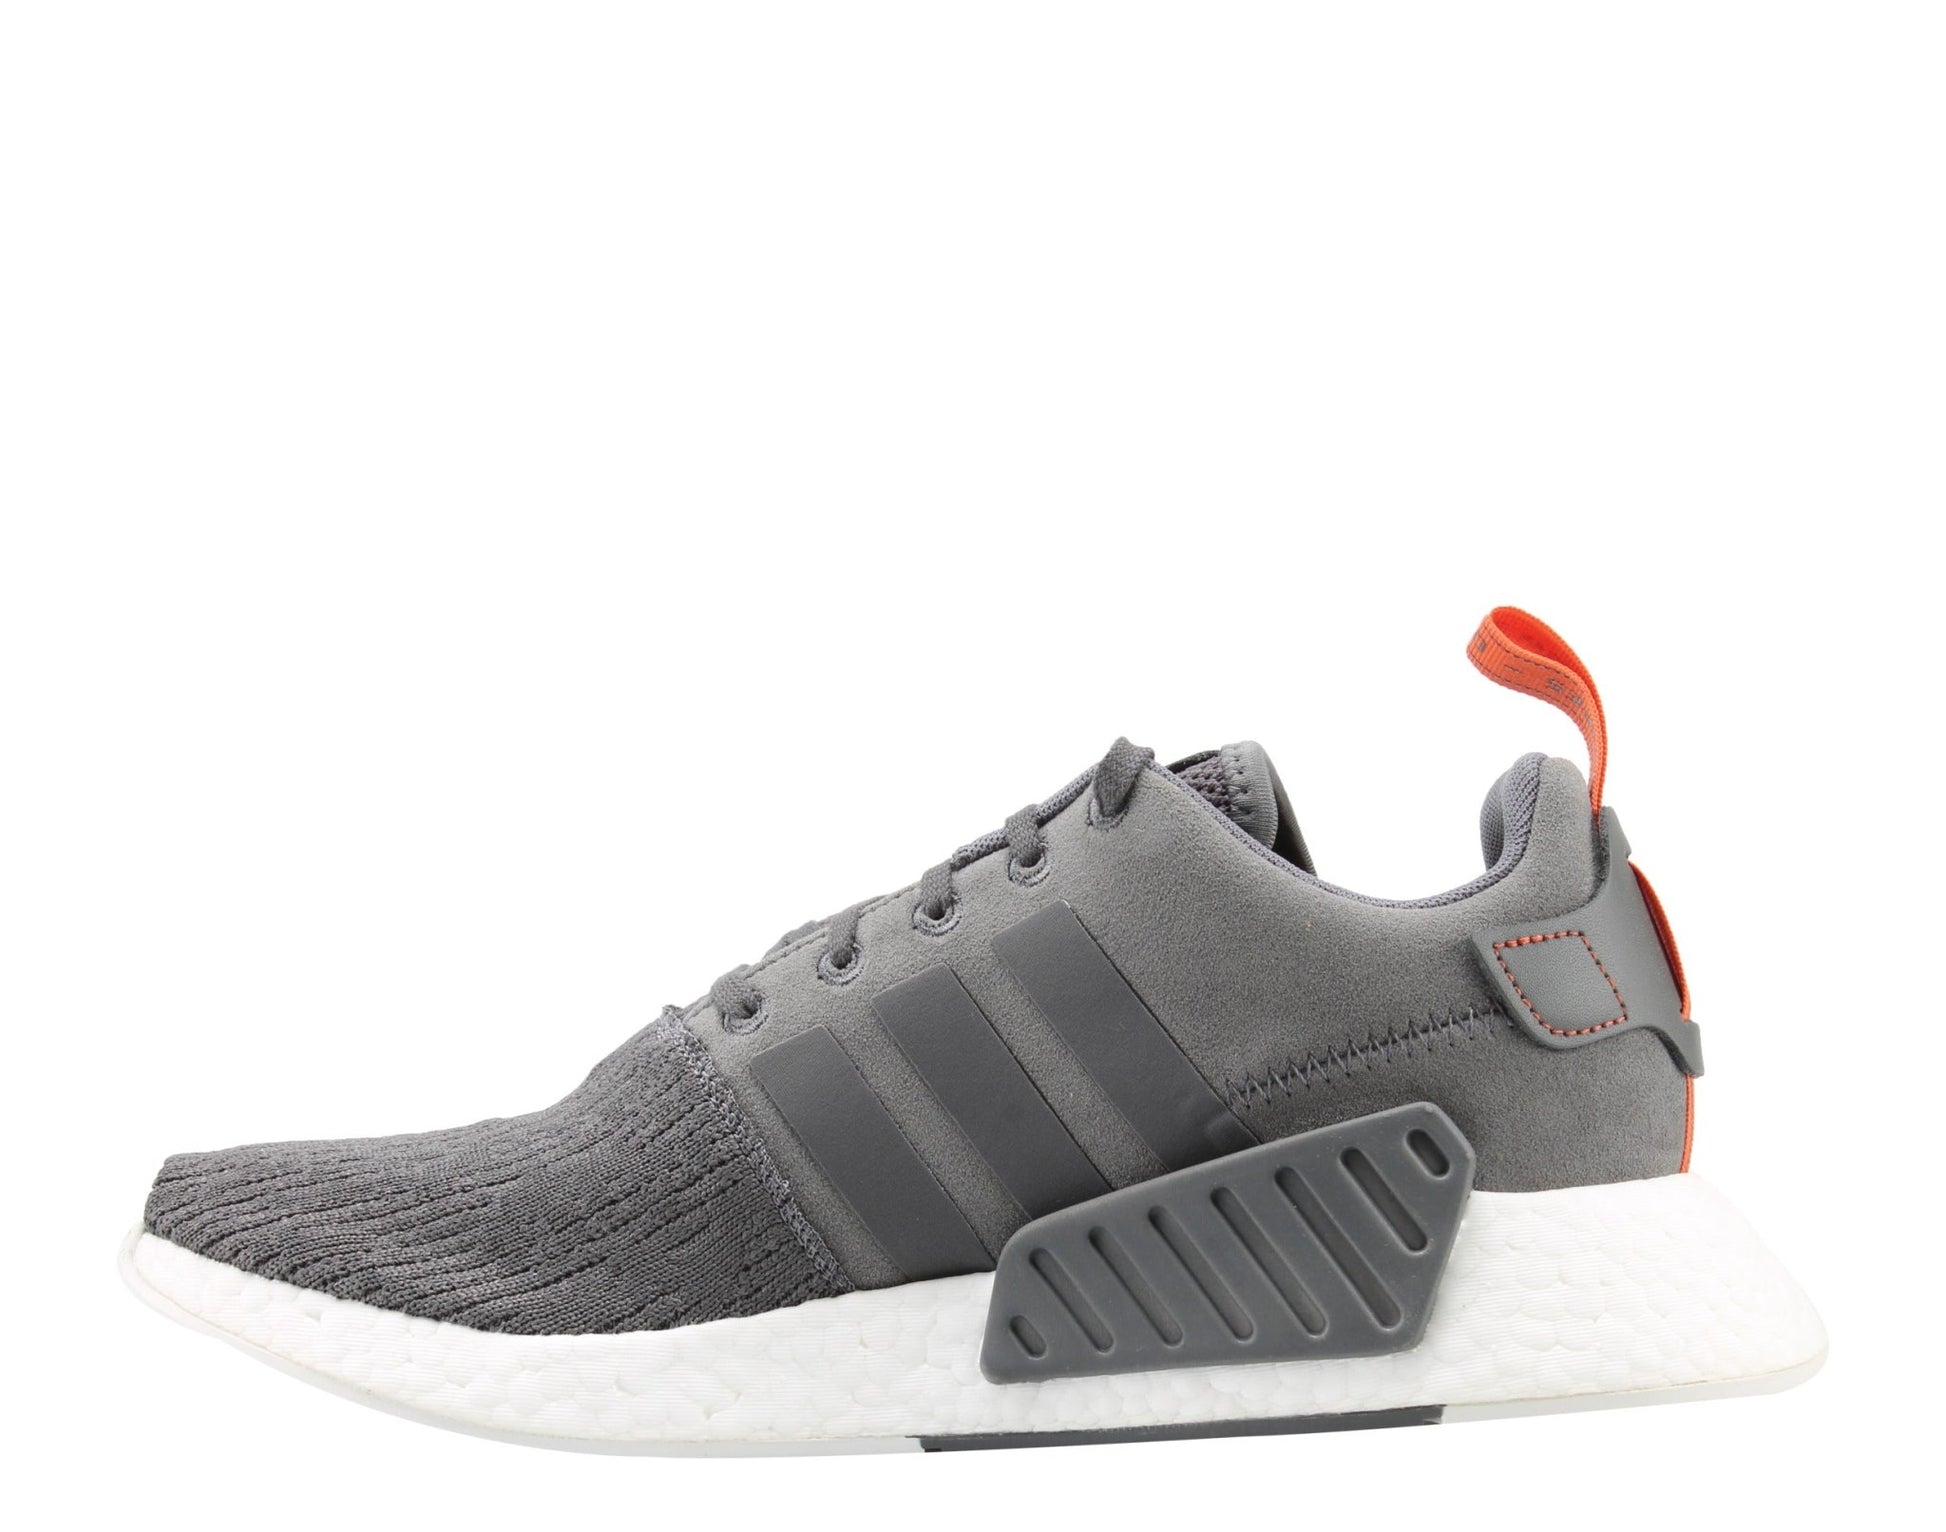 Adidas NMD_R2 Grey/Grey/Future Harvest Men's Running Shoes BY3014 - Becauze